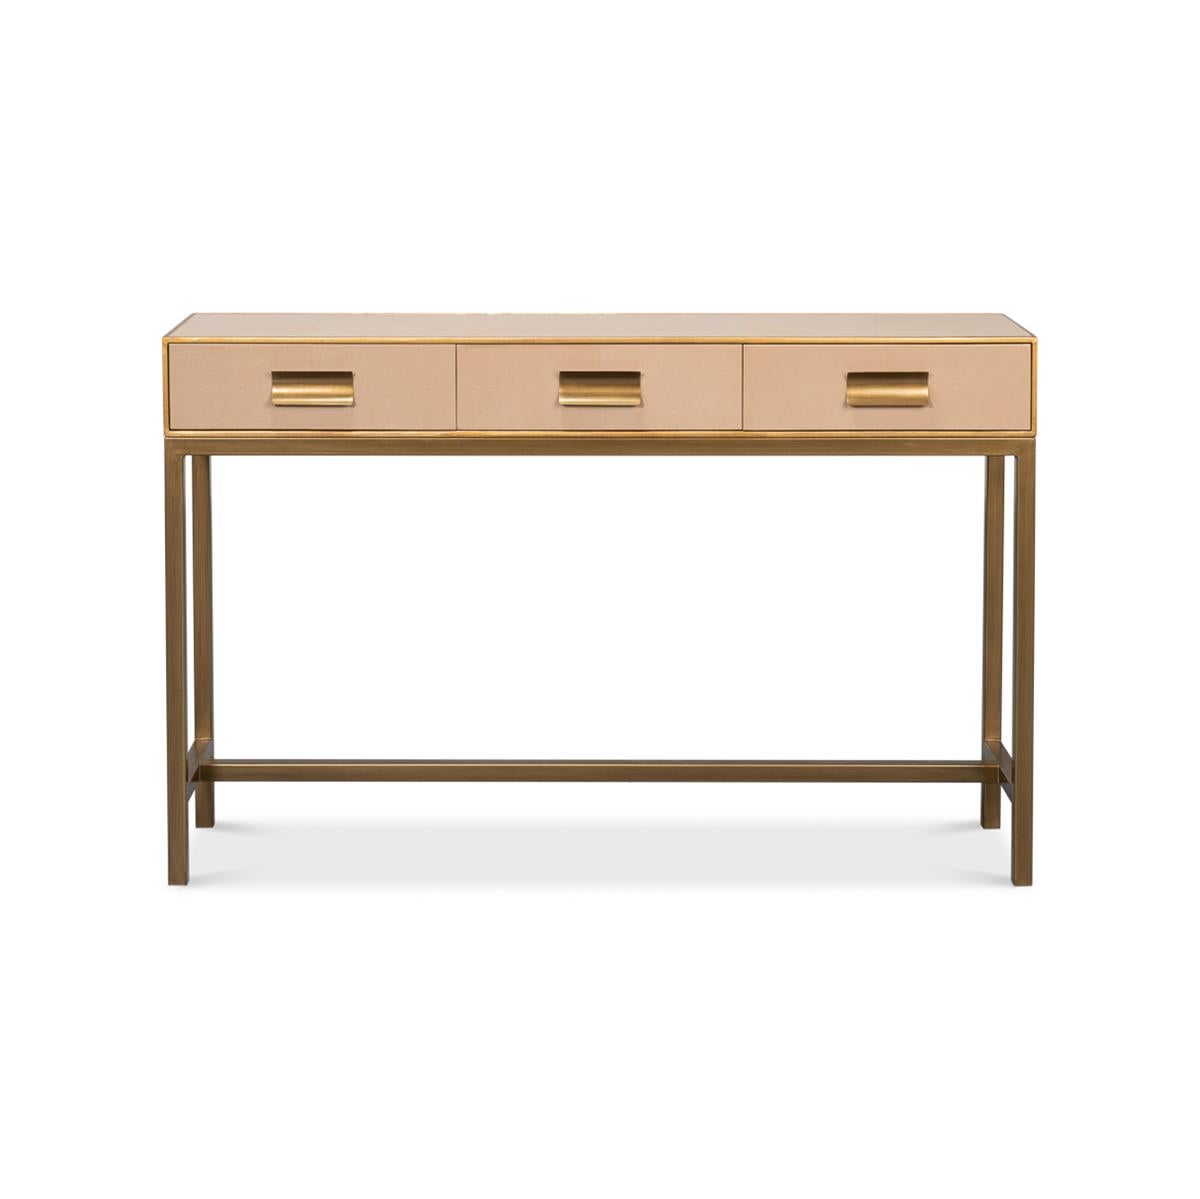 This piece, beautifully crafted with a luxurious creamy mushroom tan leather exterior, is accentuated with delicate gilt trim, adding a hint of glamour to its modern design. The console measures 54